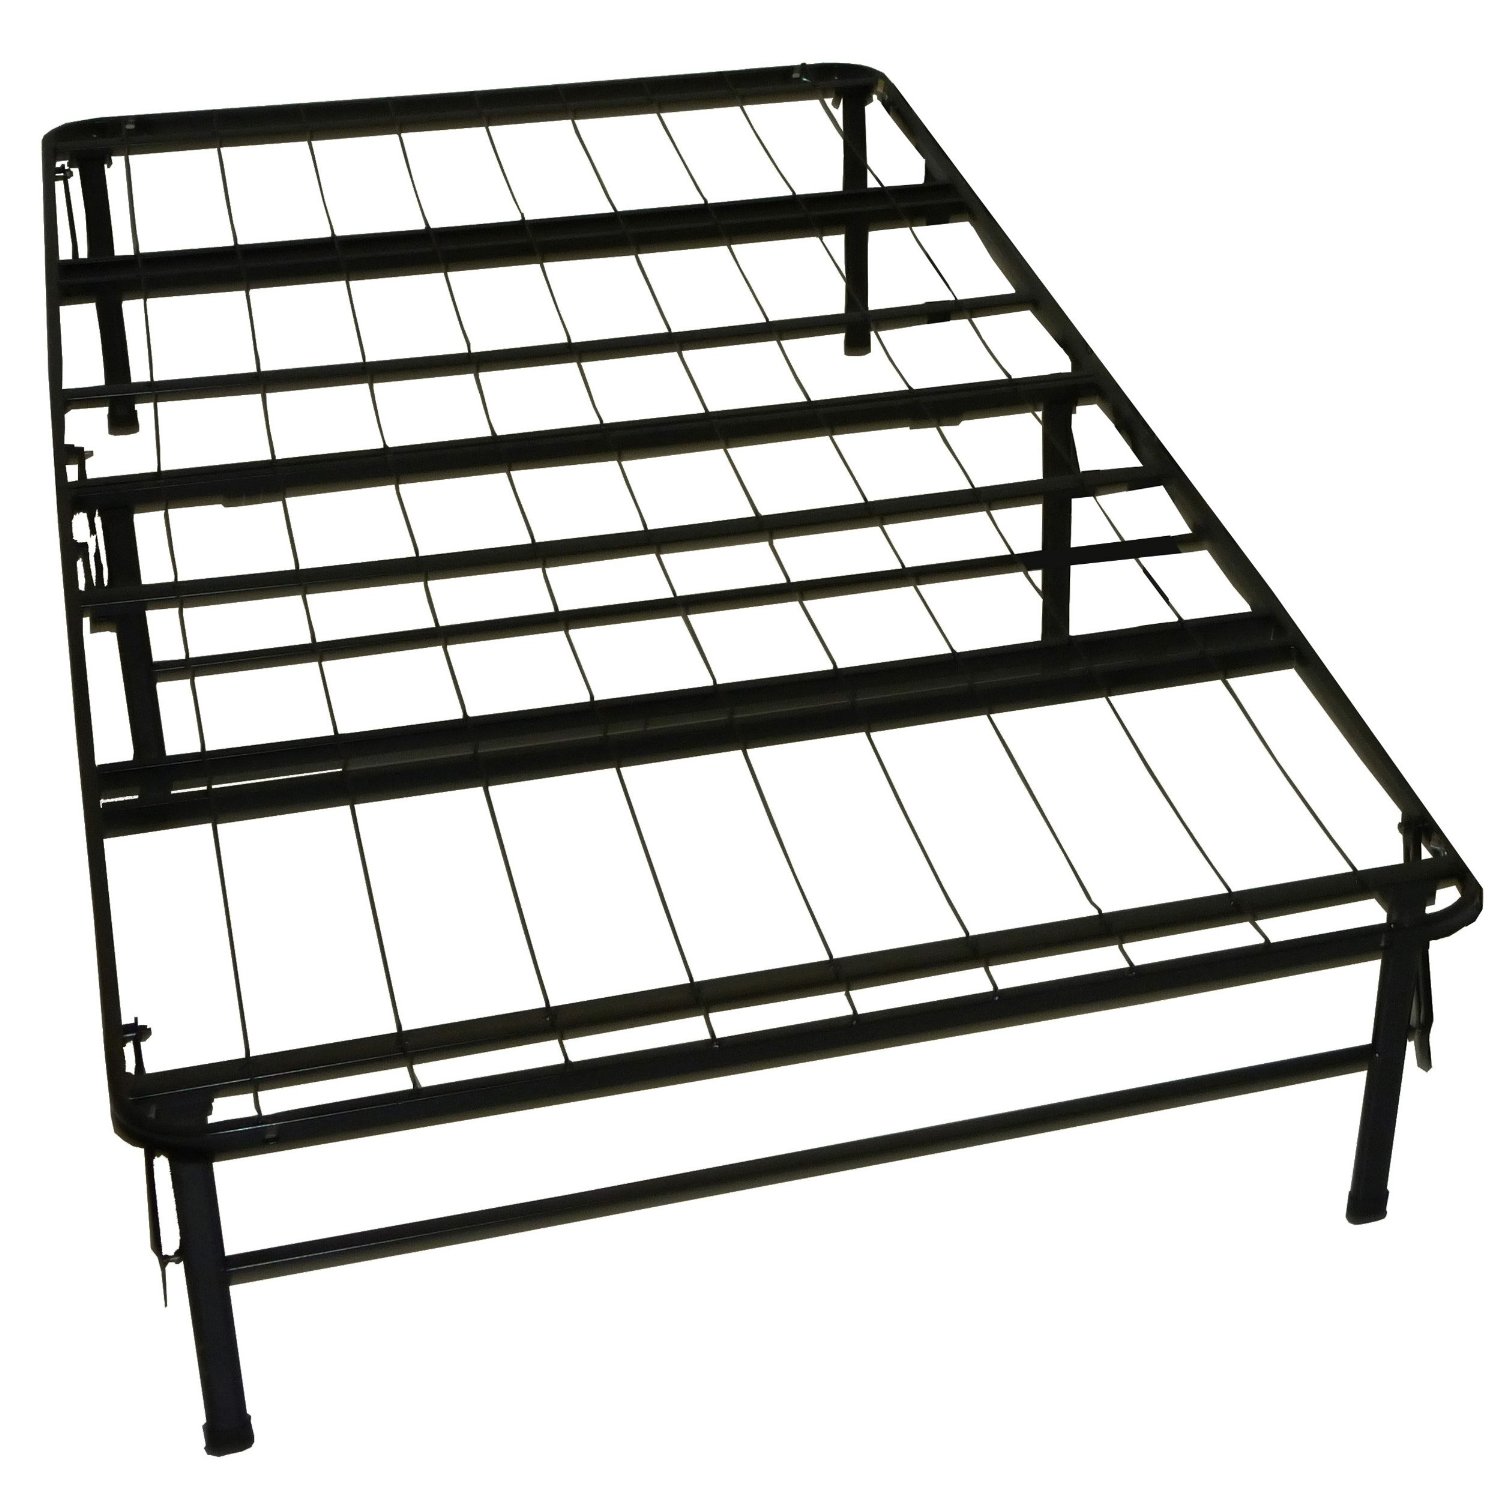 GreenHome123 Twin XL Folding Metal Platform Bed Frame - No Box-spring Needed